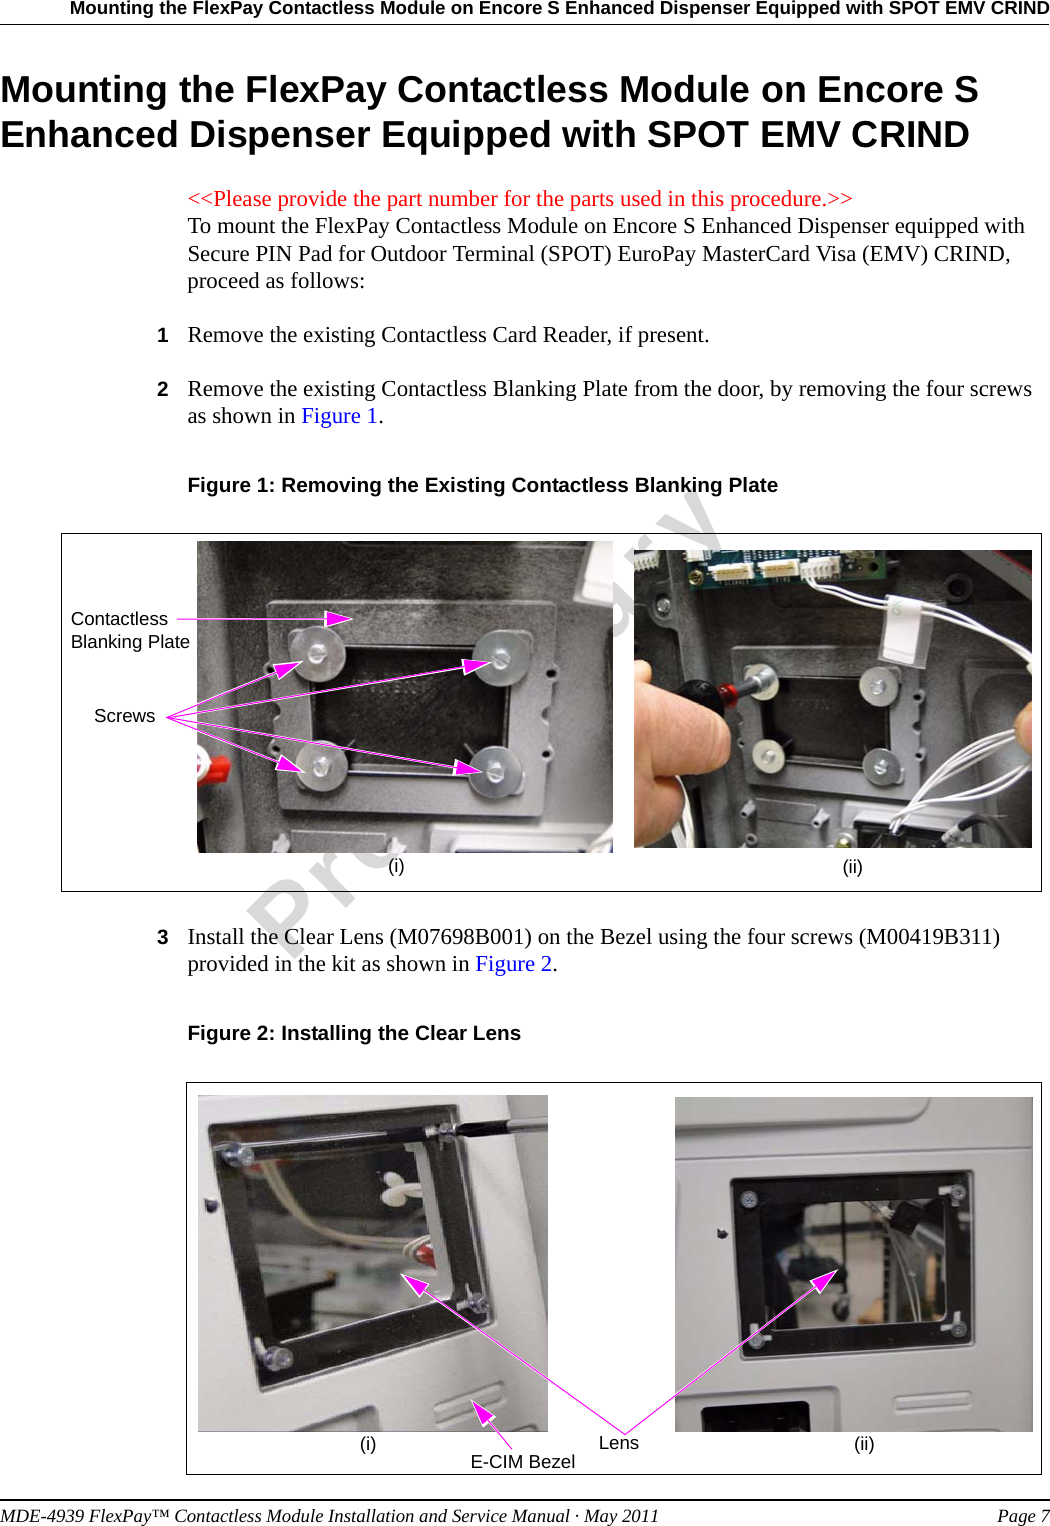 MDE-4939 FlexPay™ Contactless Module Installation and Service Manual · May 2011 Page 7Mounting the FlexPay Contactless Module on Encore S Enhanced Dispenser Equipped with SPOT EMV CRINDPreliminaryMounting the FlexPay Contactless Module on Encore S Enhanced Dispenser Equipped with SPOT EMV CRIND&lt;&lt;Please provide the part number for the parts used in this procedure.&gt;&gt; To mount the FlexPay Contactless Module on Encore S Enhanced Dispenser equipped with Secure PIN Pad for Outdoor Terminal (SPOT) EuroPay MasterCard Visa (EMV) CRIND, proceed as follows:1Remove the existing Contactless Card Reader, if present.2Remove the existing Contactless Blanking Plate from the door, by removing the four screws  as shown in Figure 1.Figure 1: Removing the Existing Contactless Blanking PlateContactless Blanking PlateScrews(i) (ii)3Install the Clear Lens (M07698B001) on the Bezel using the four screws (M00419B311) provided in the kit as shown in Figure 2.Figure 2: Installing the Clear LensLensE-CIM Bezel(i) (ii)